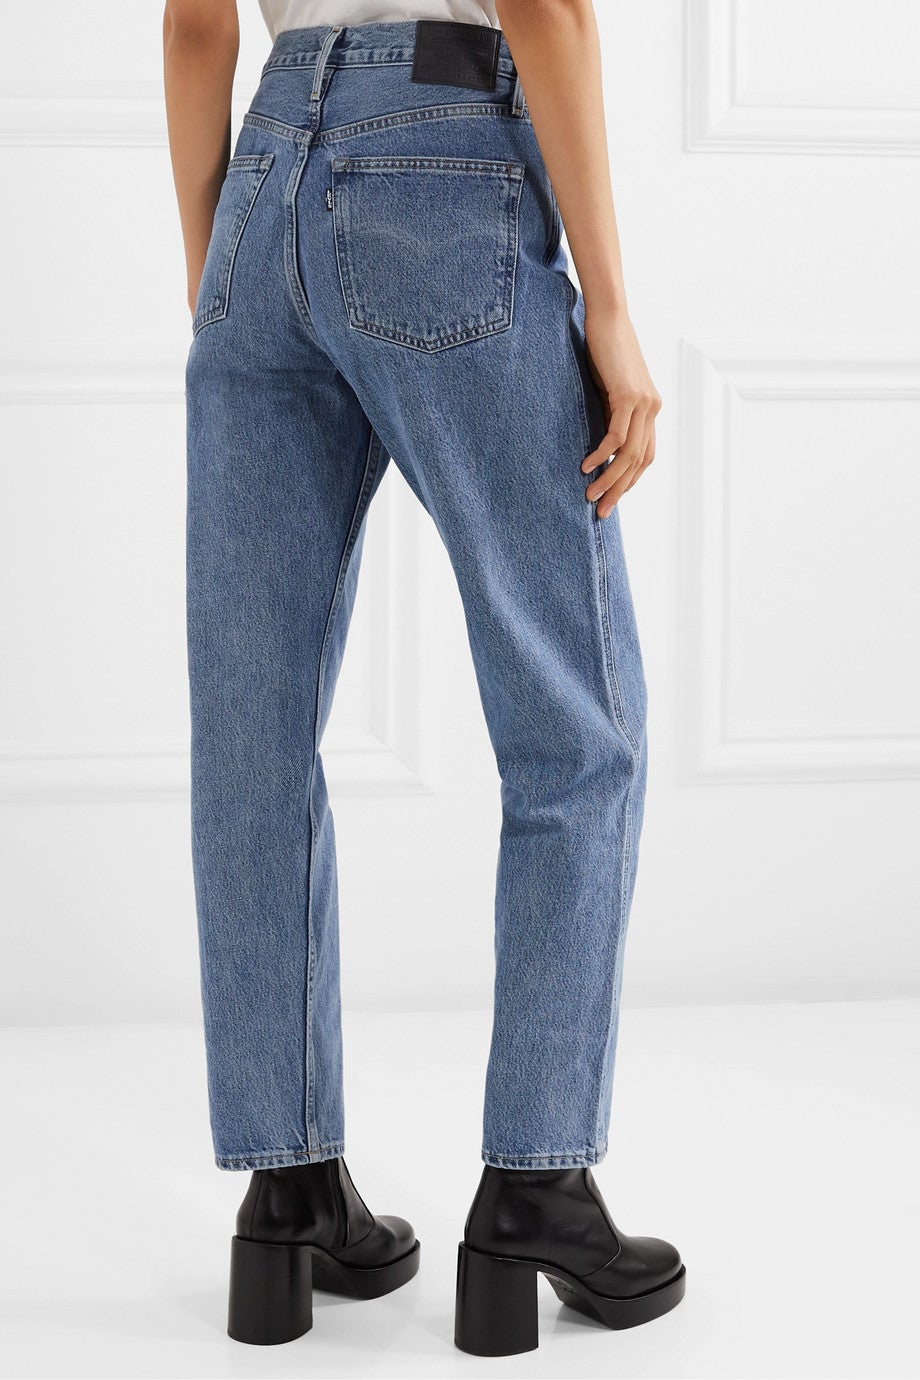 Levi’s Made & Crafted + The Column Mid-rise Straight-Leg